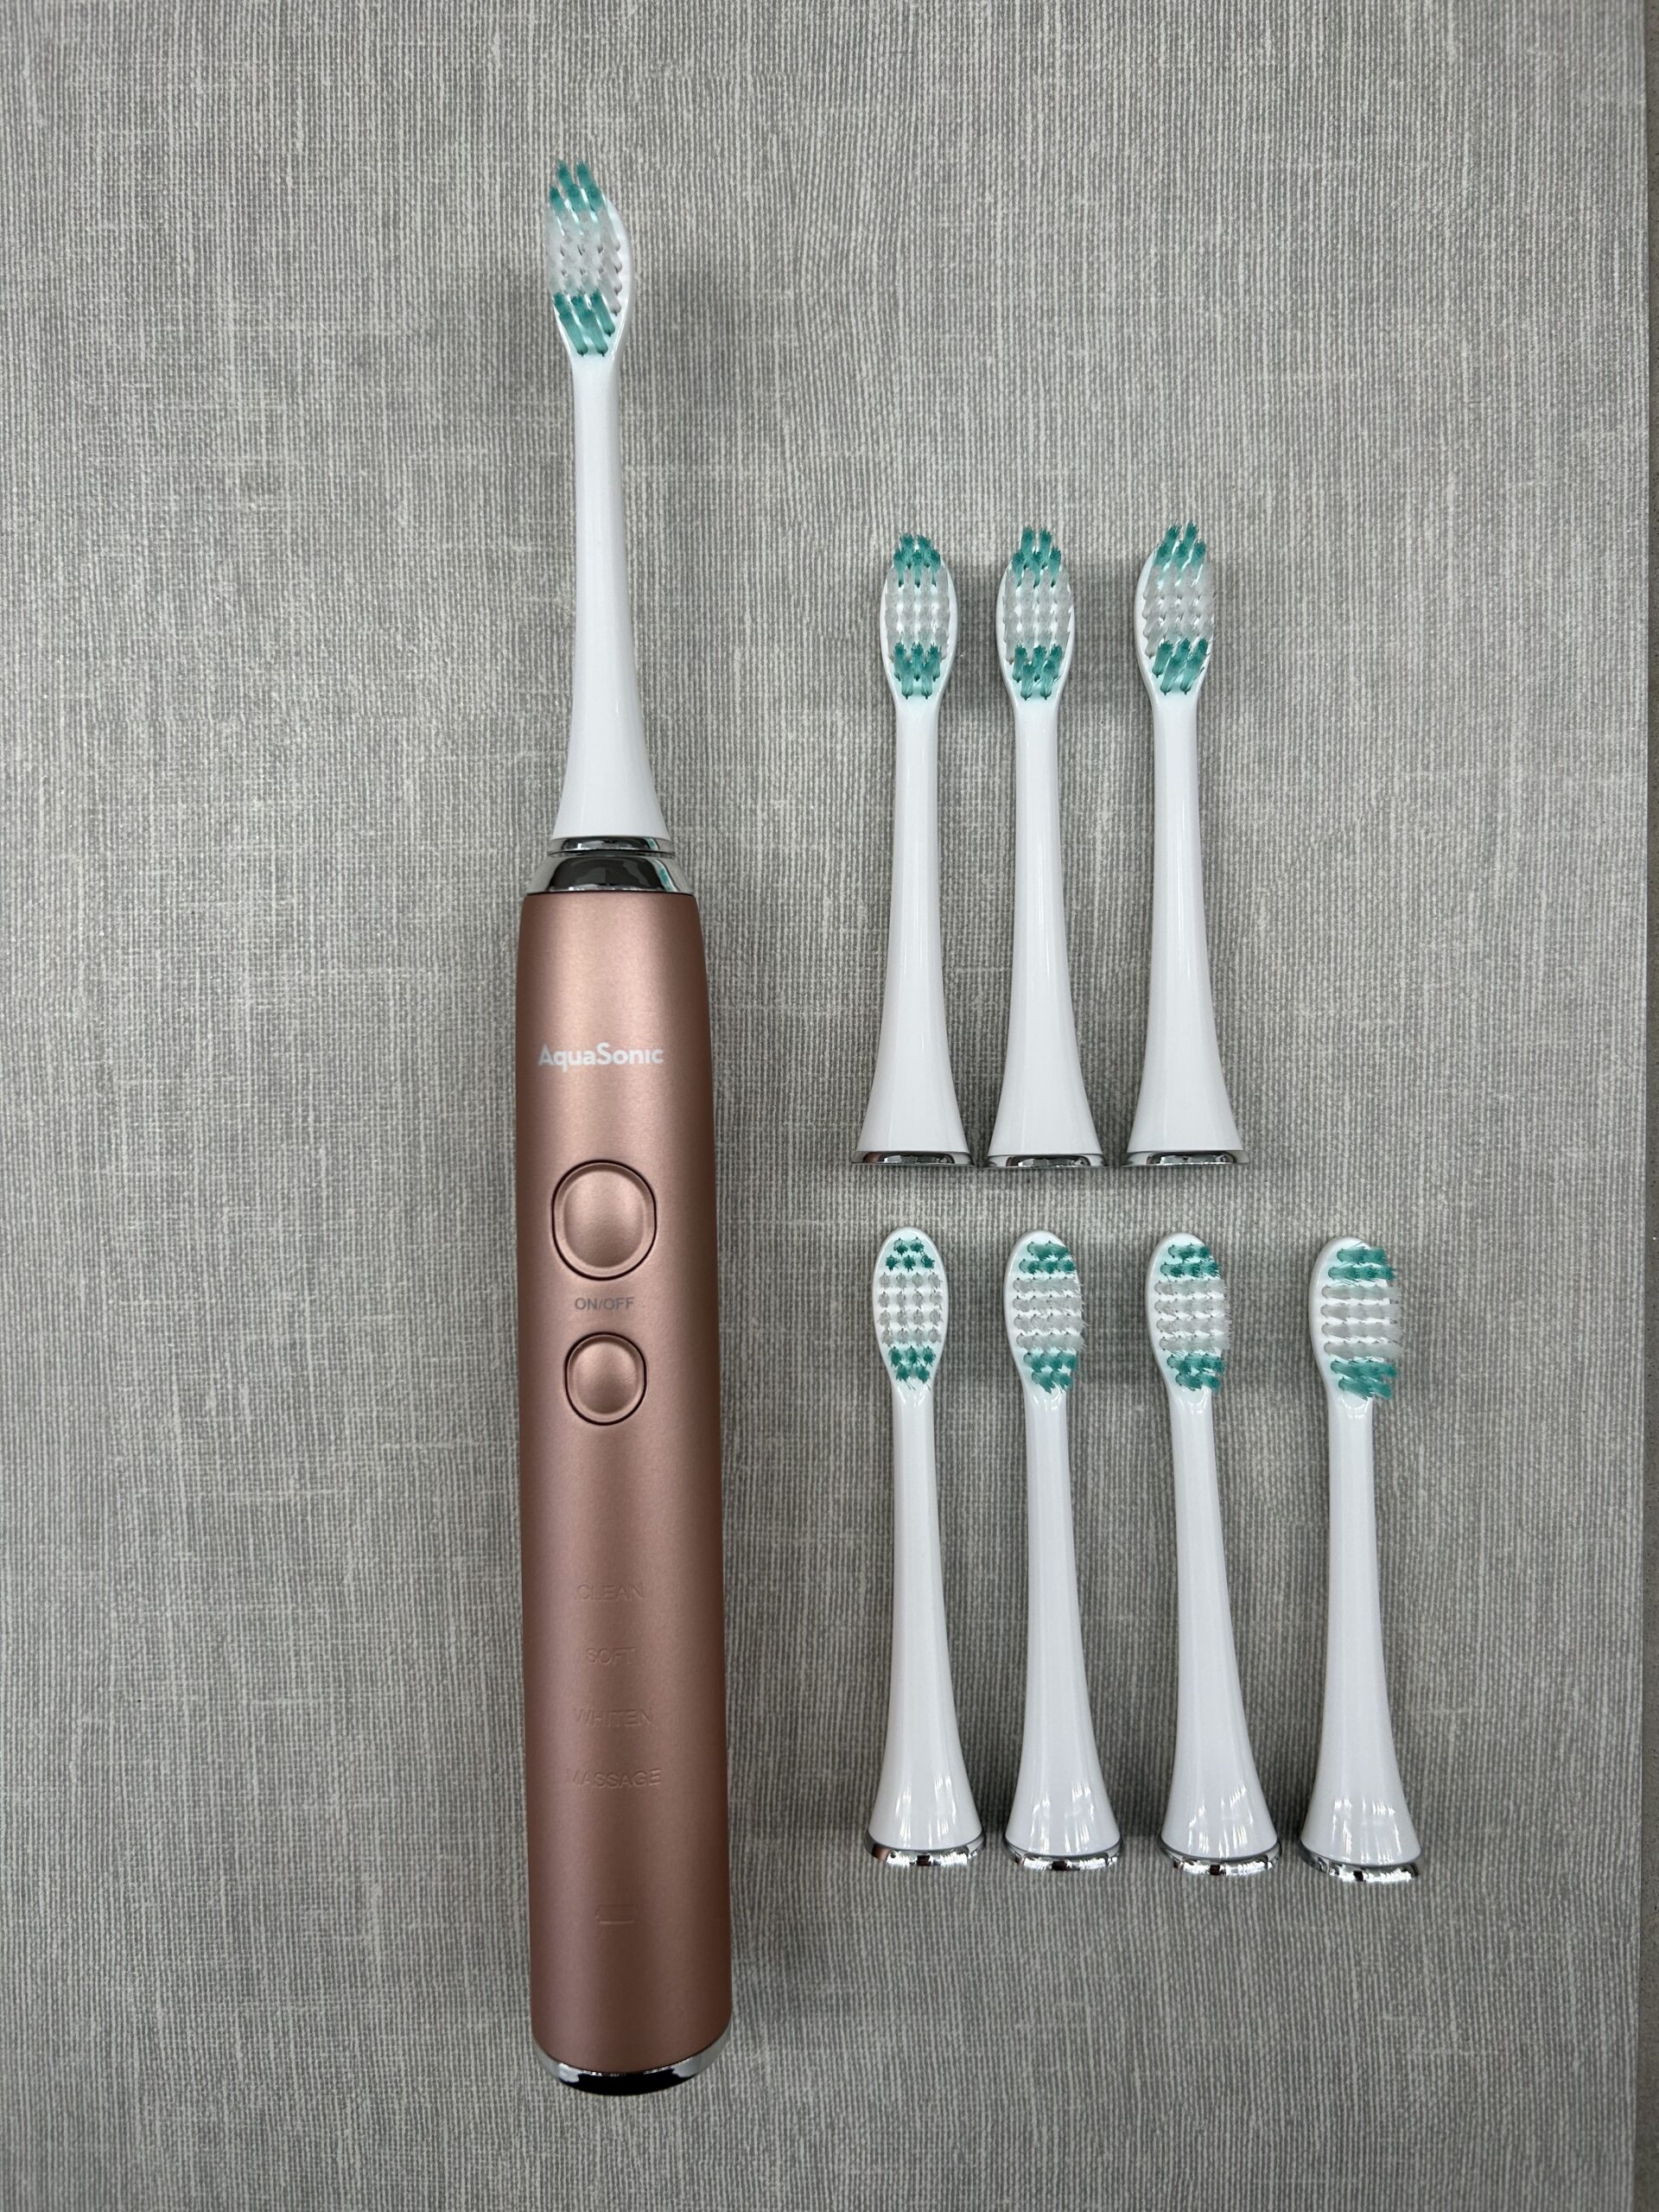 Aquasonic Vibe Series Ultra Whitening Electric Toothbrush Review | My Dental Advocate